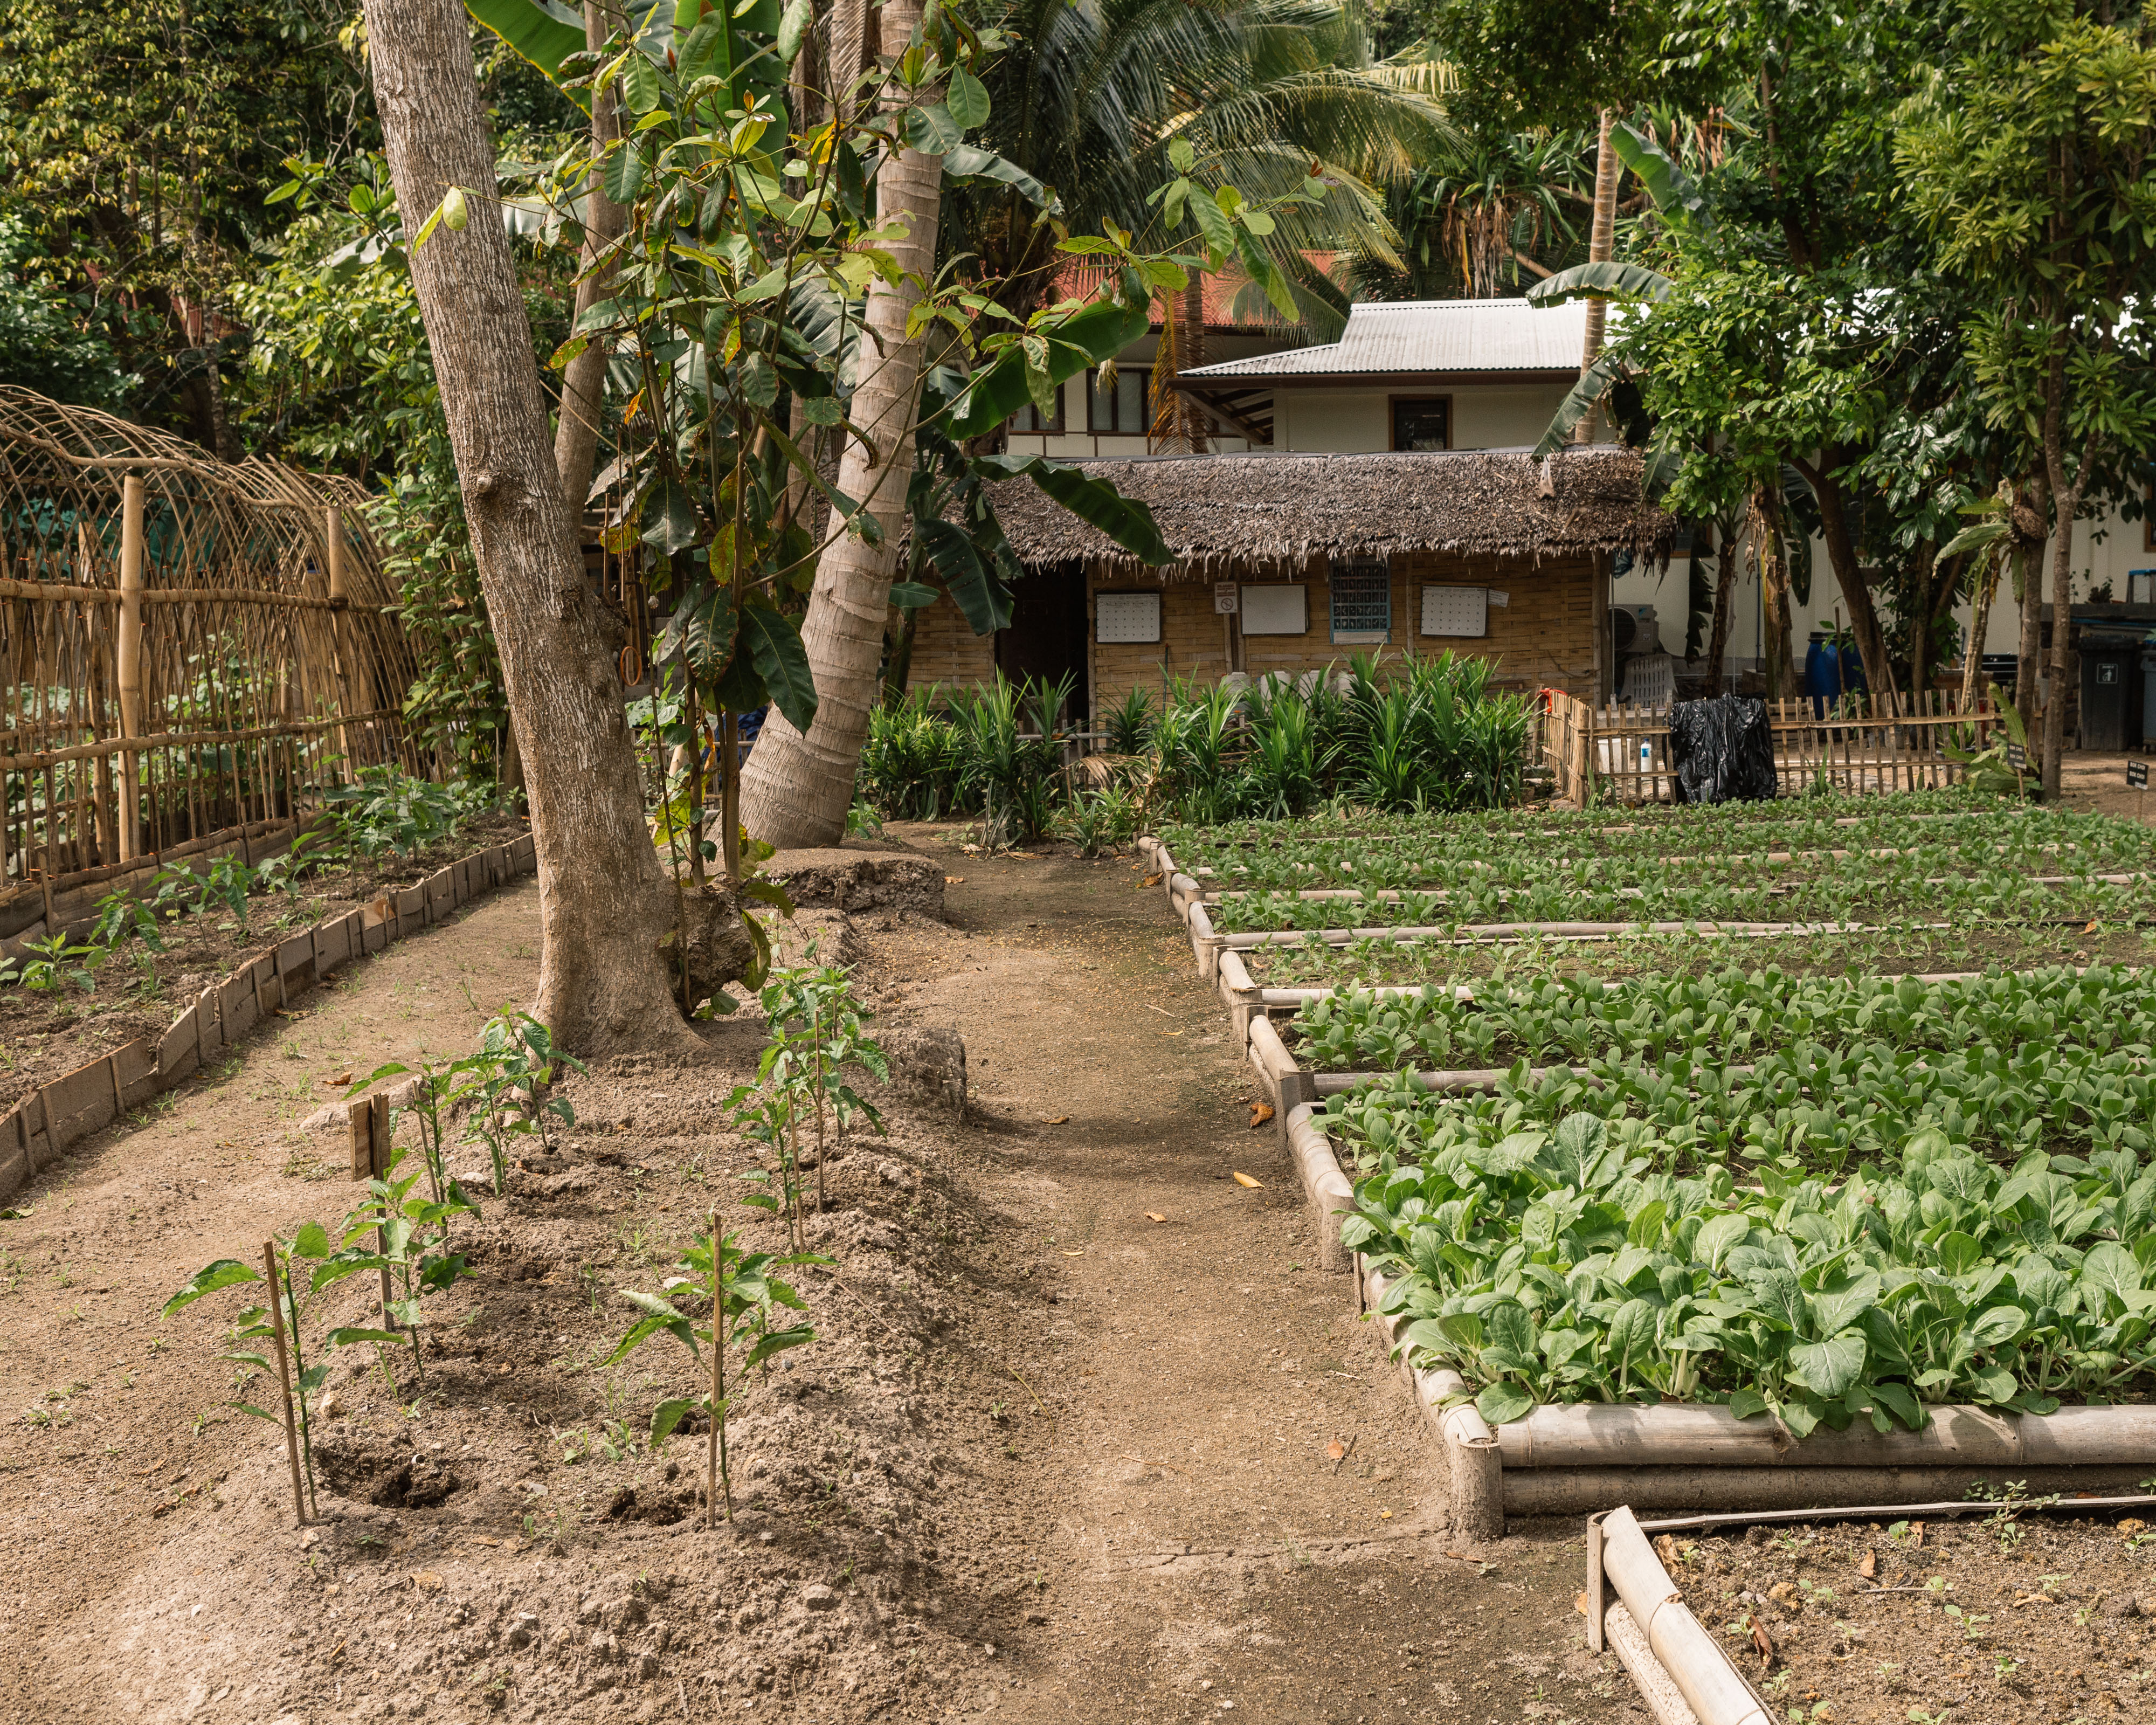 What's growing in the permaculture gardens at Bawah Reserve, Indonesia